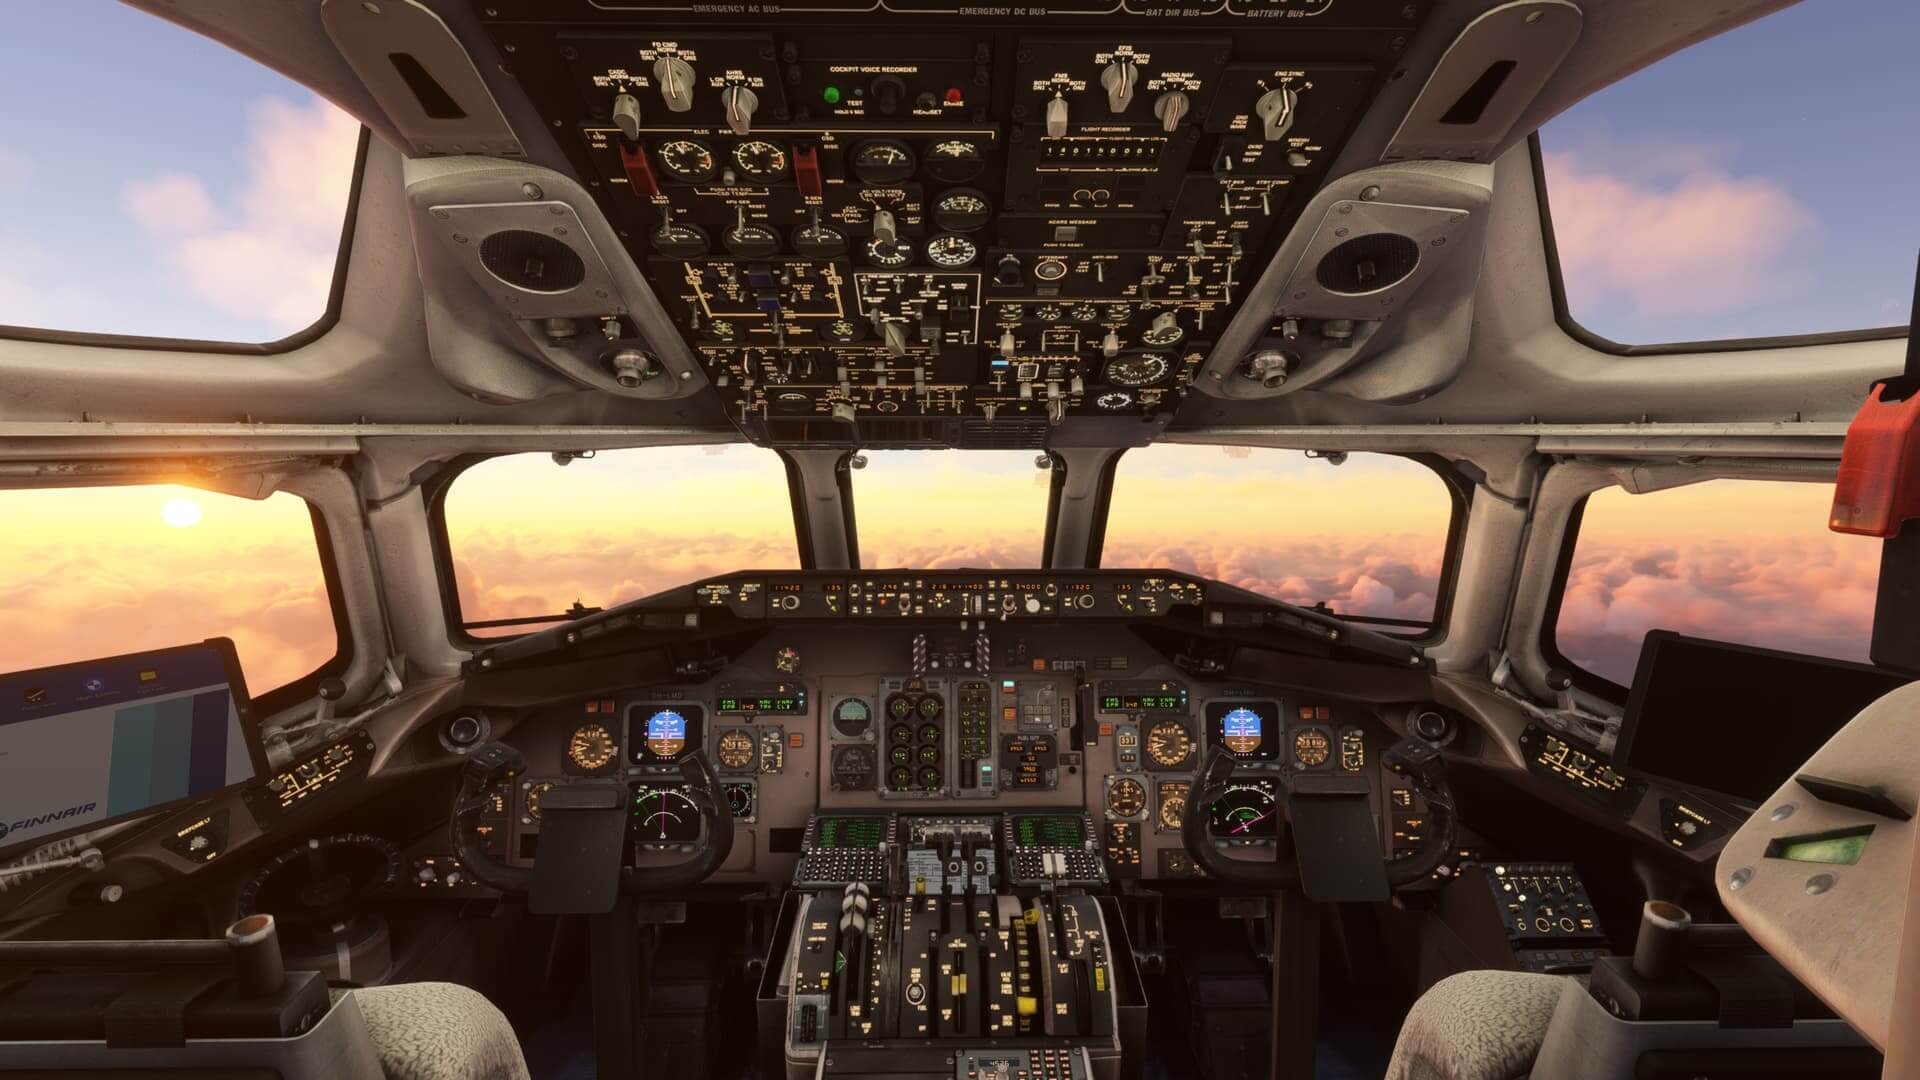 An image of the cockpit of a plane, with the sunrise visible outside the windows.